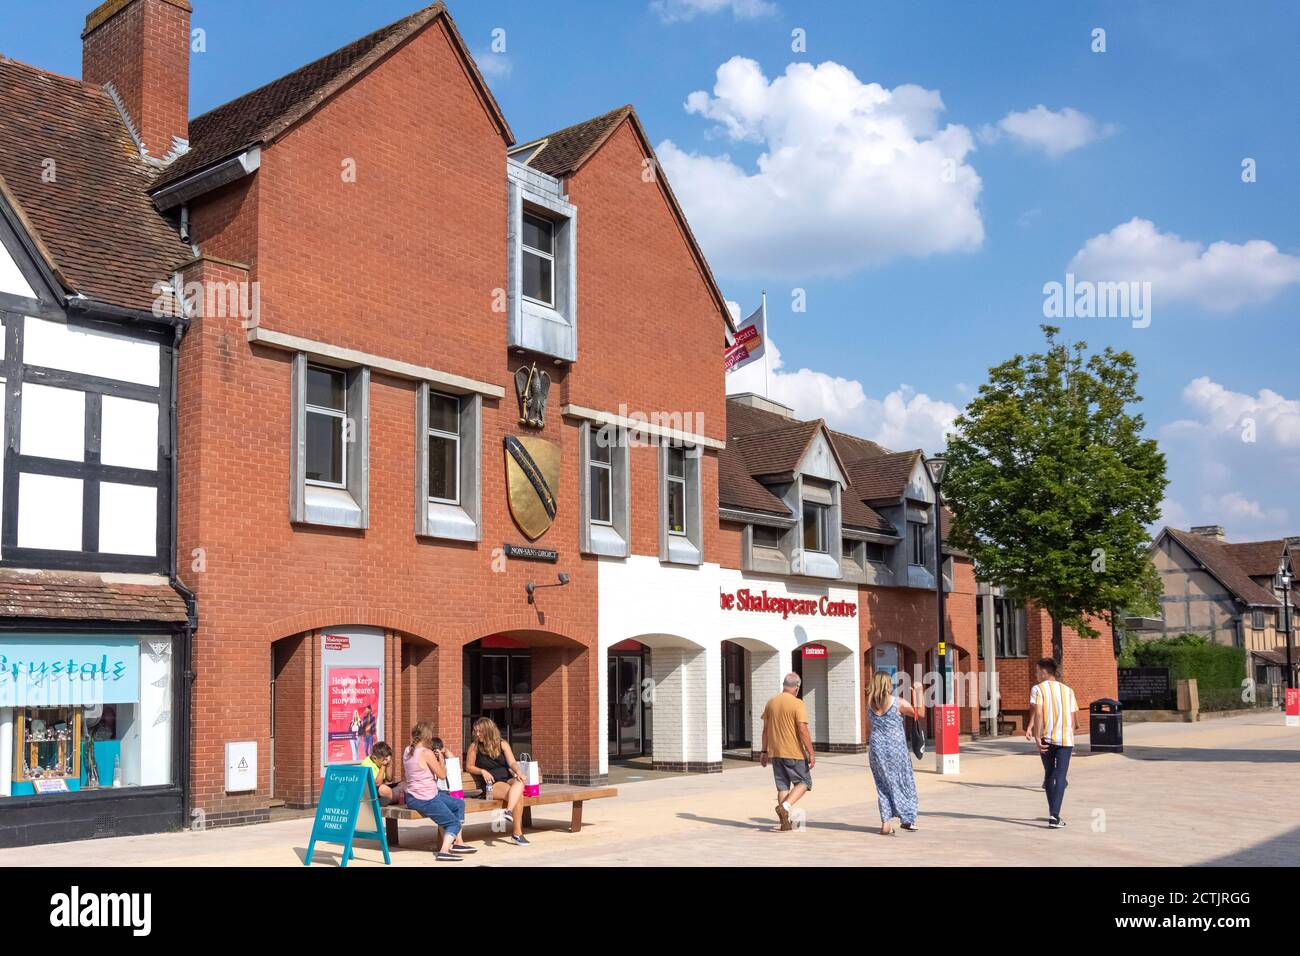 Le Centre de Shakespeare, Henley Road, Stratford-upon-Avon, Warwickshire, Angleterre, Royaume-Uni Banque D'Images